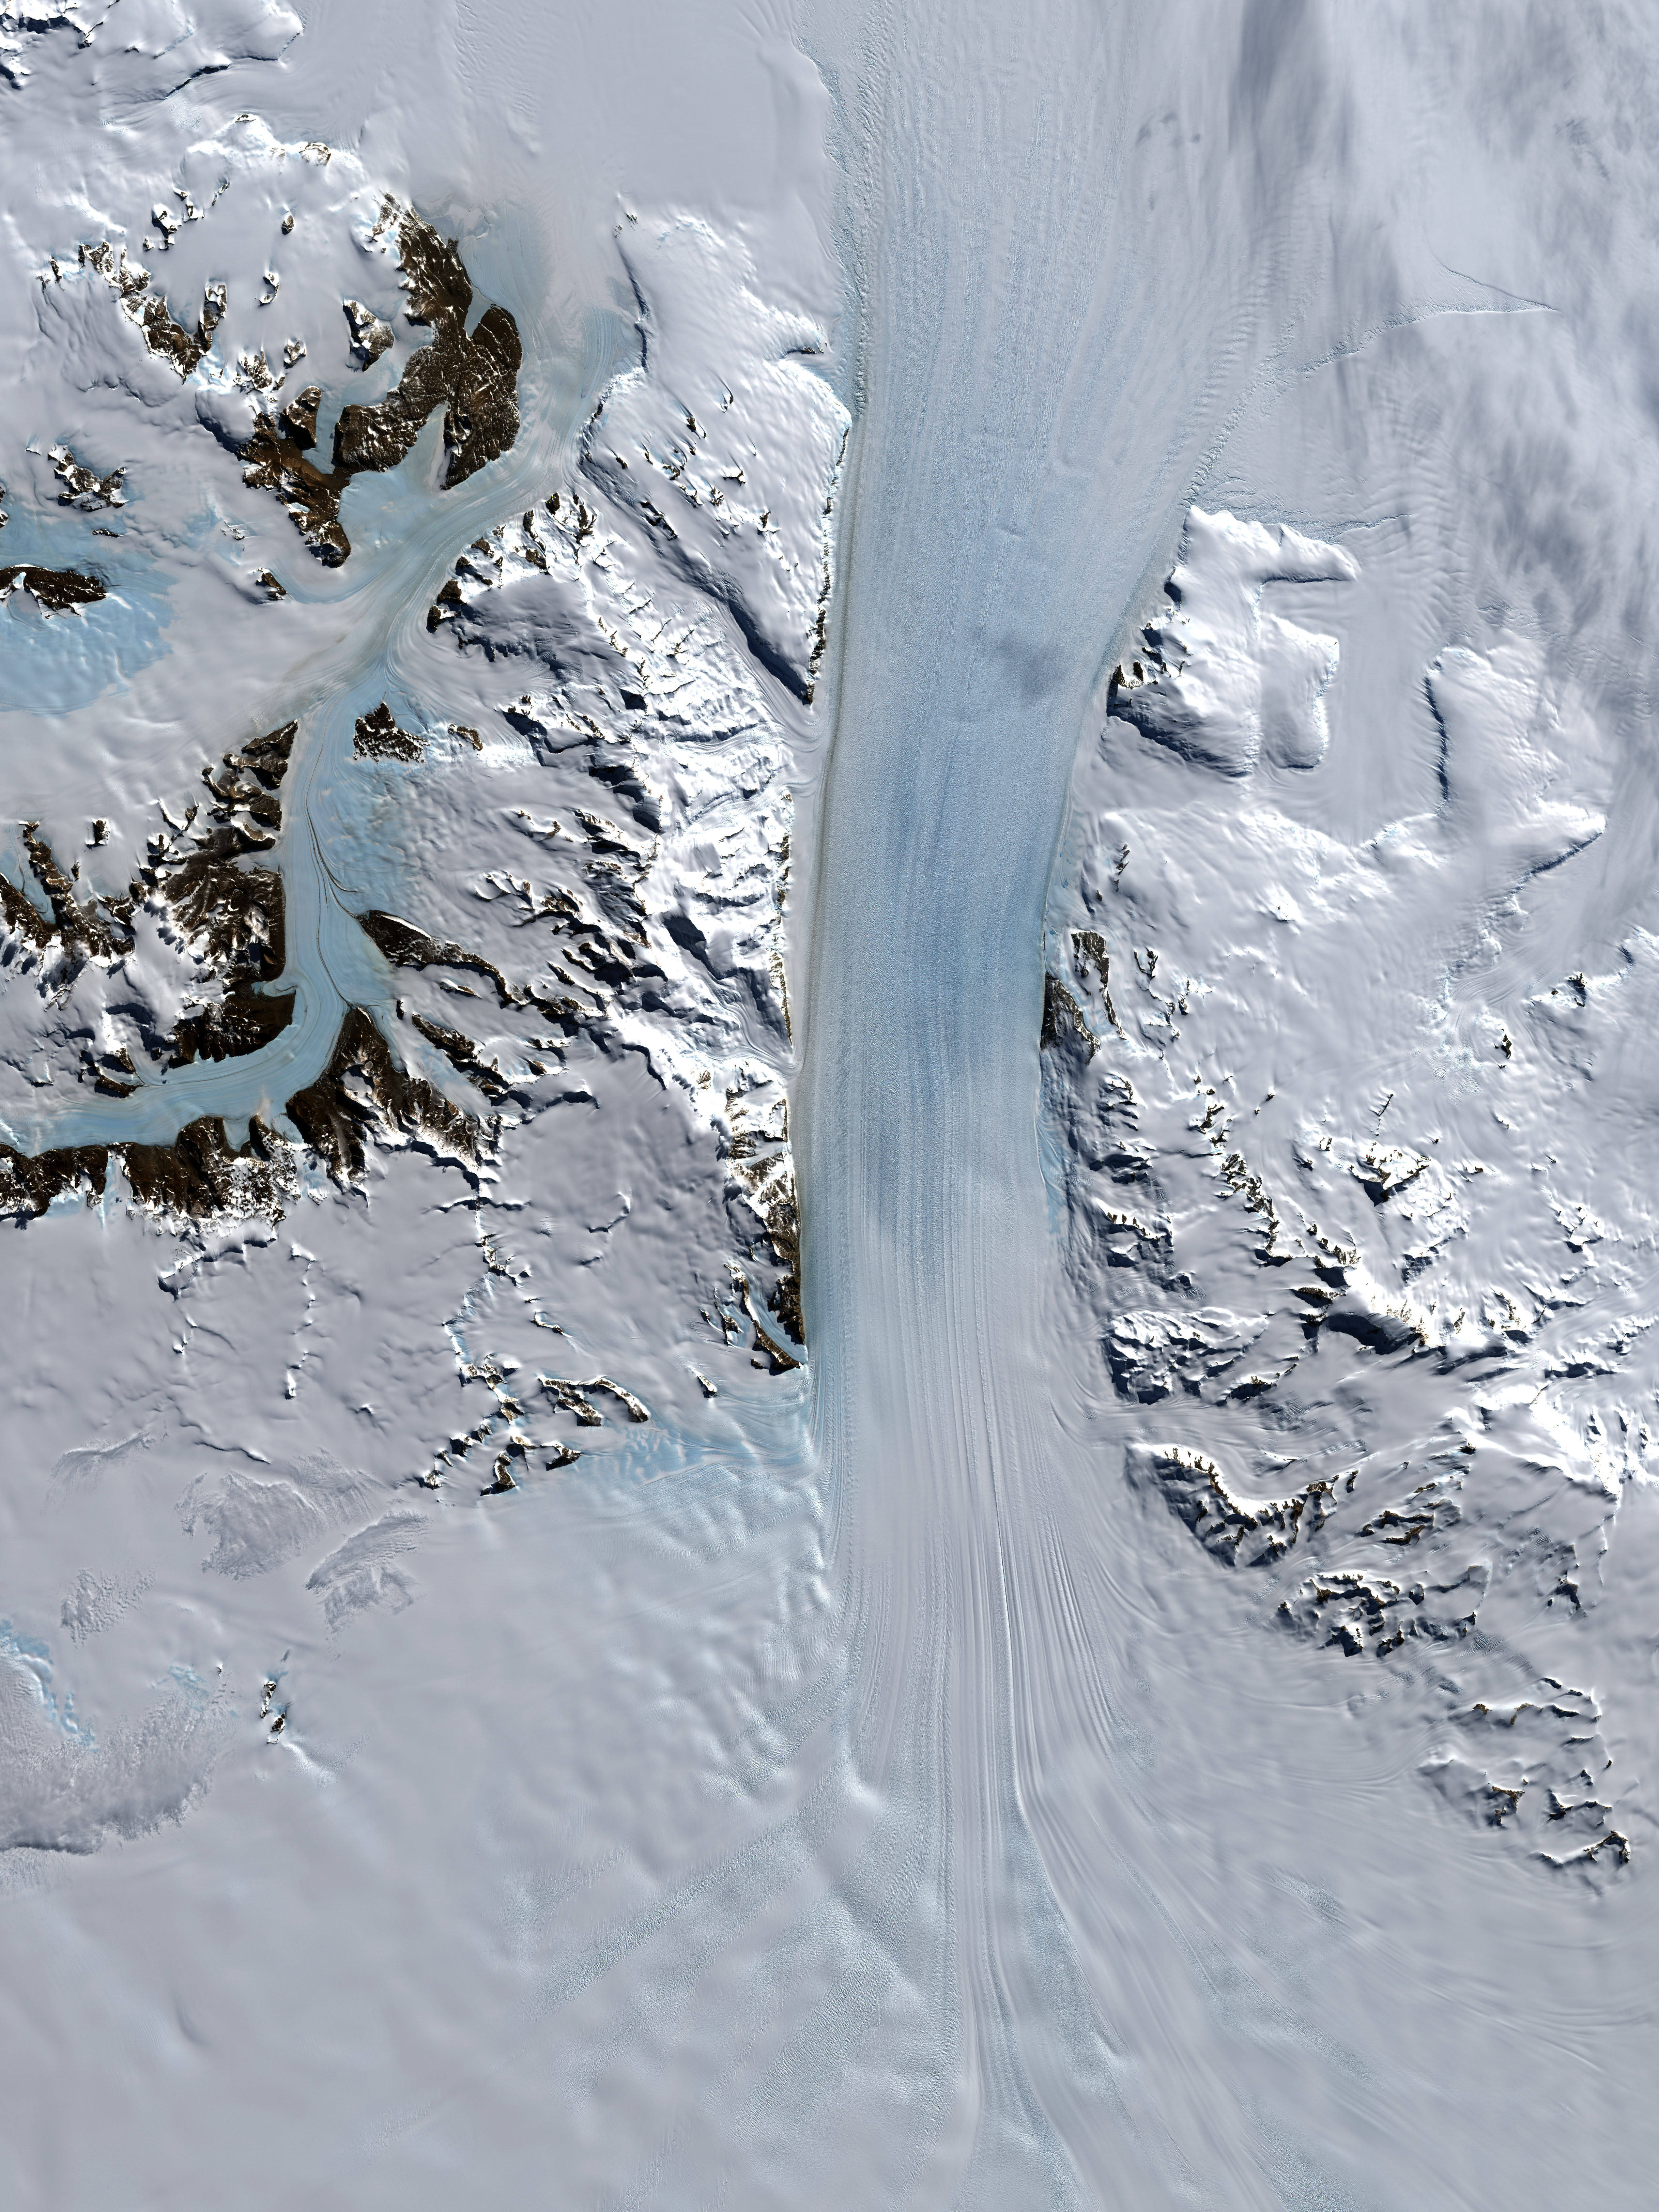 Byrd Glacier, Antarctica - related image preview